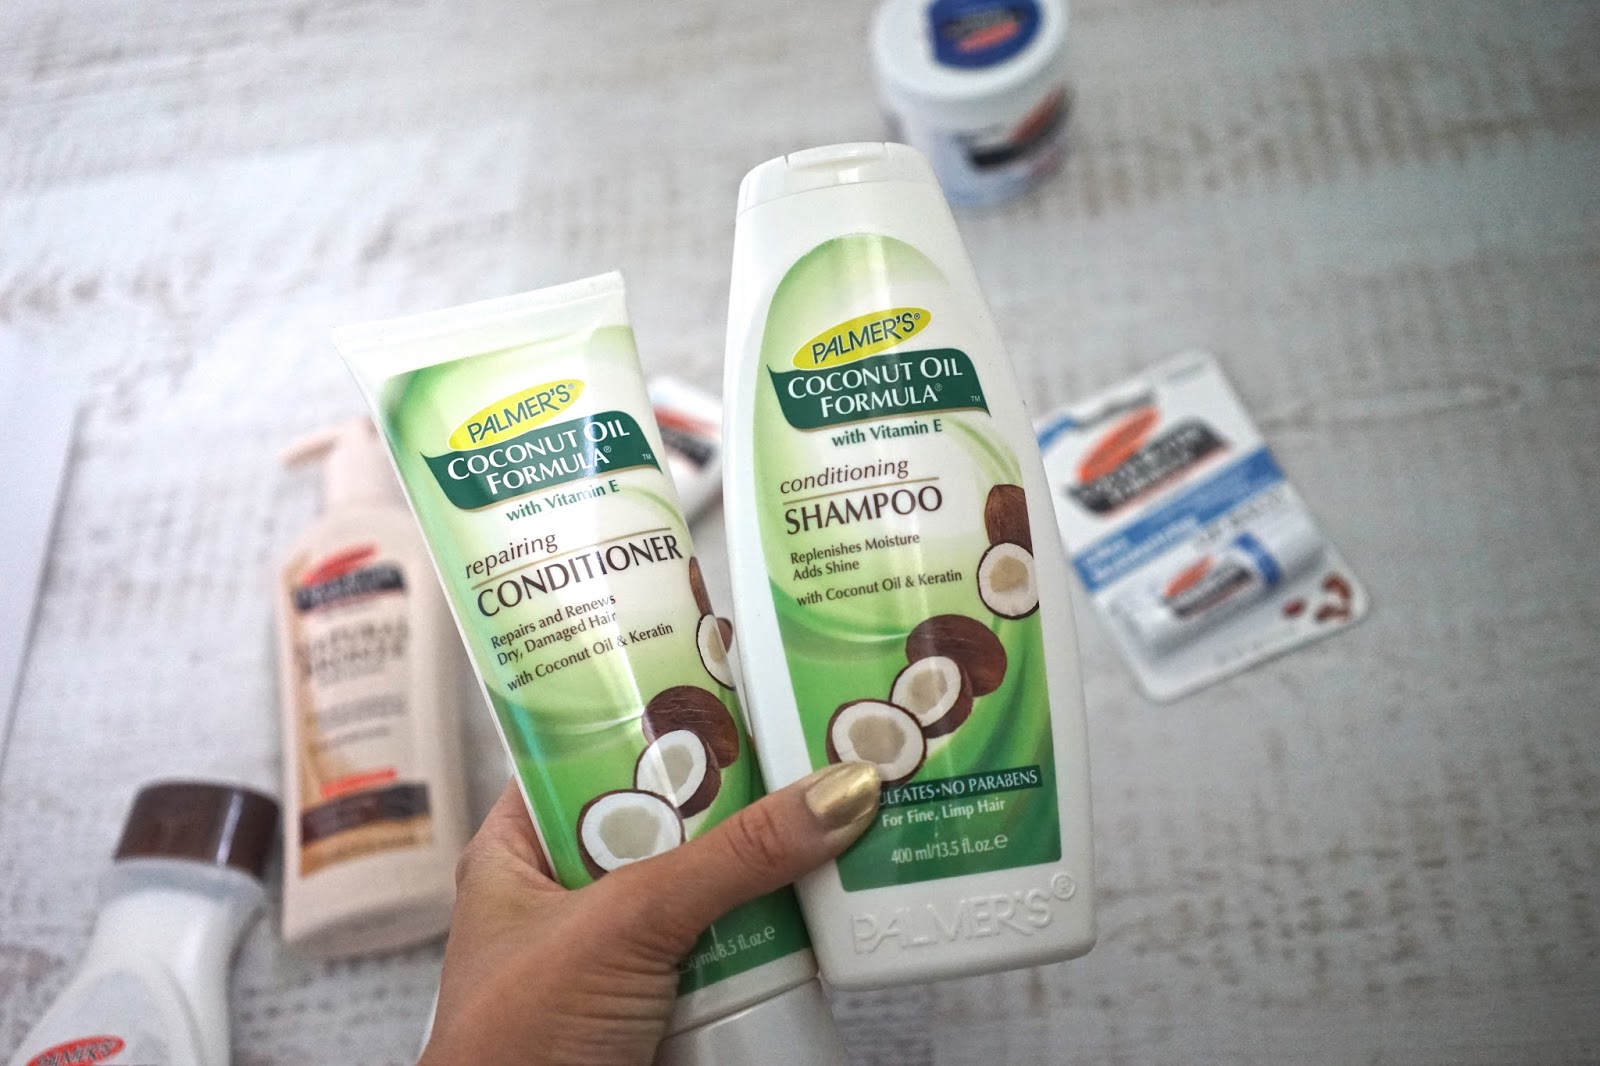 Palmer's cocoa butter for hair